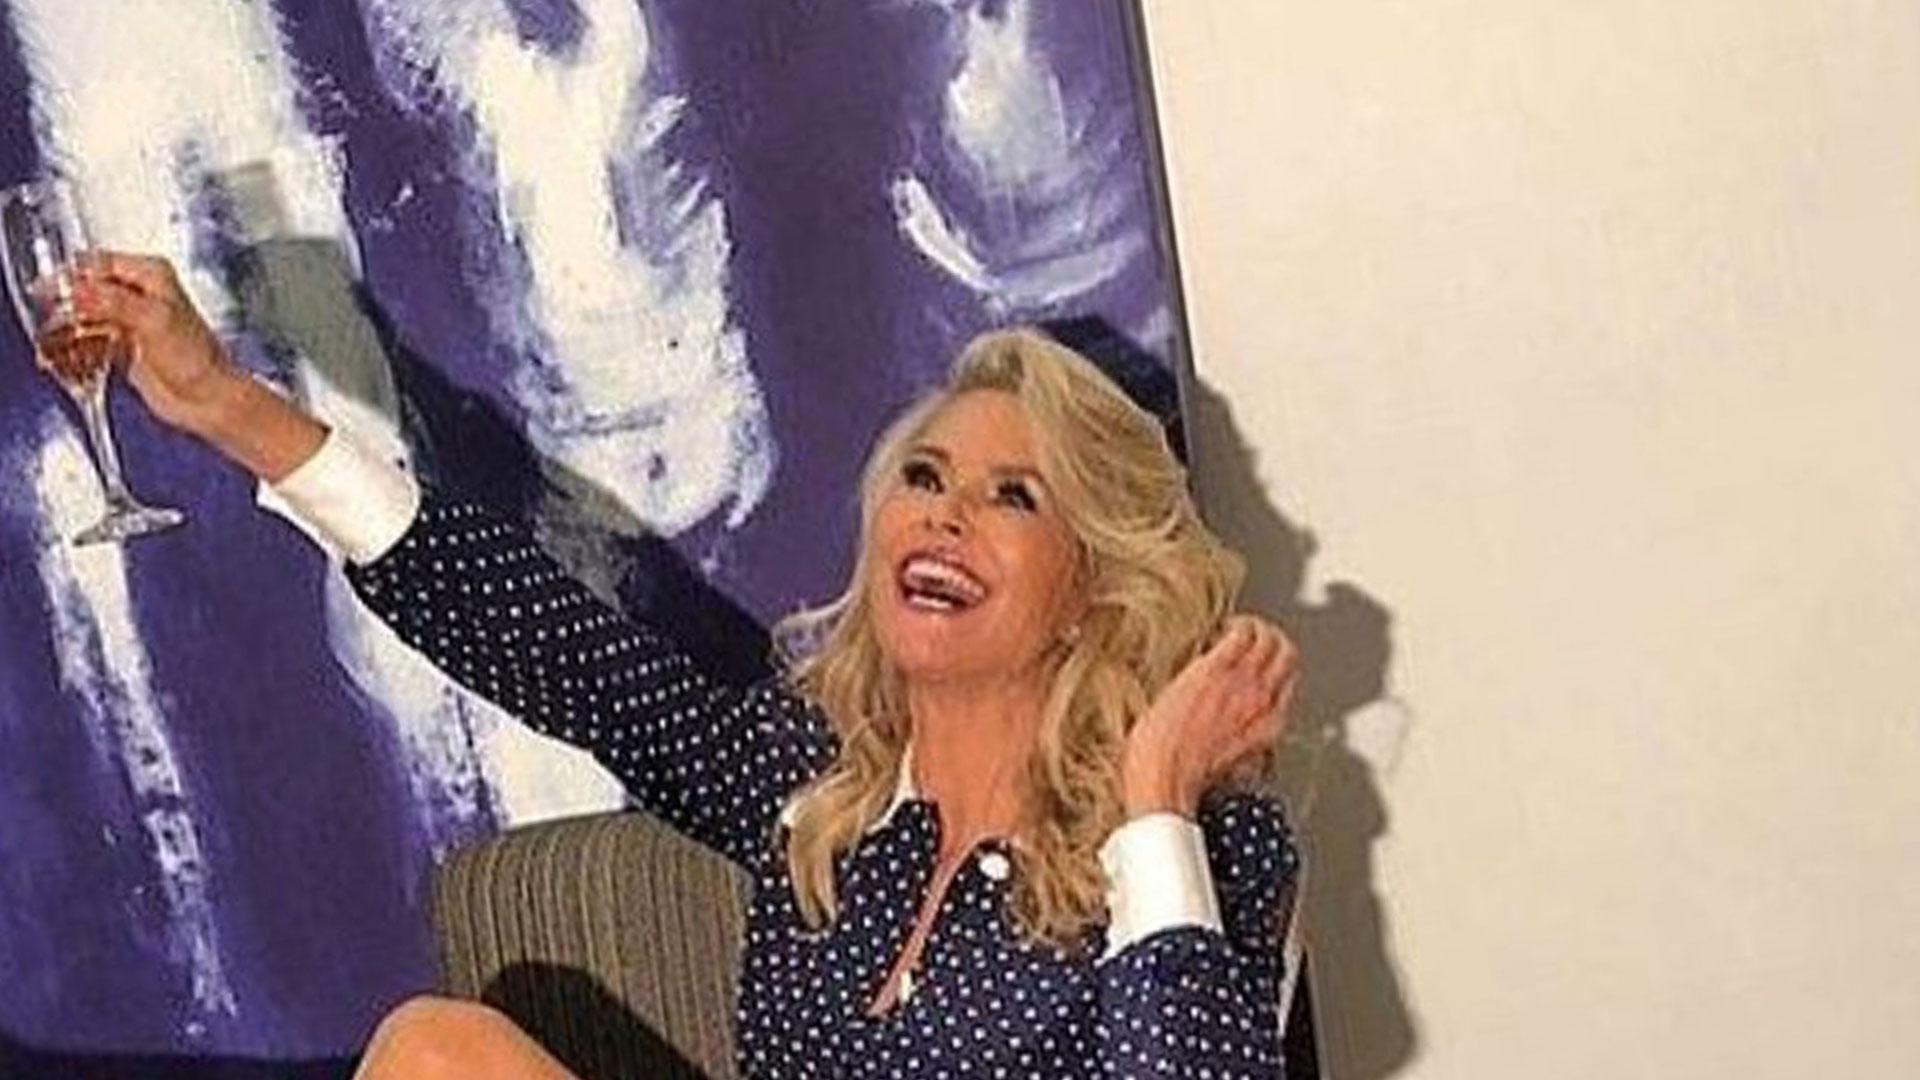 Christie Brinkley, 70, shows off her long and toned legs as she kicks her heels up in new photo after cancer diagnosis [Video]